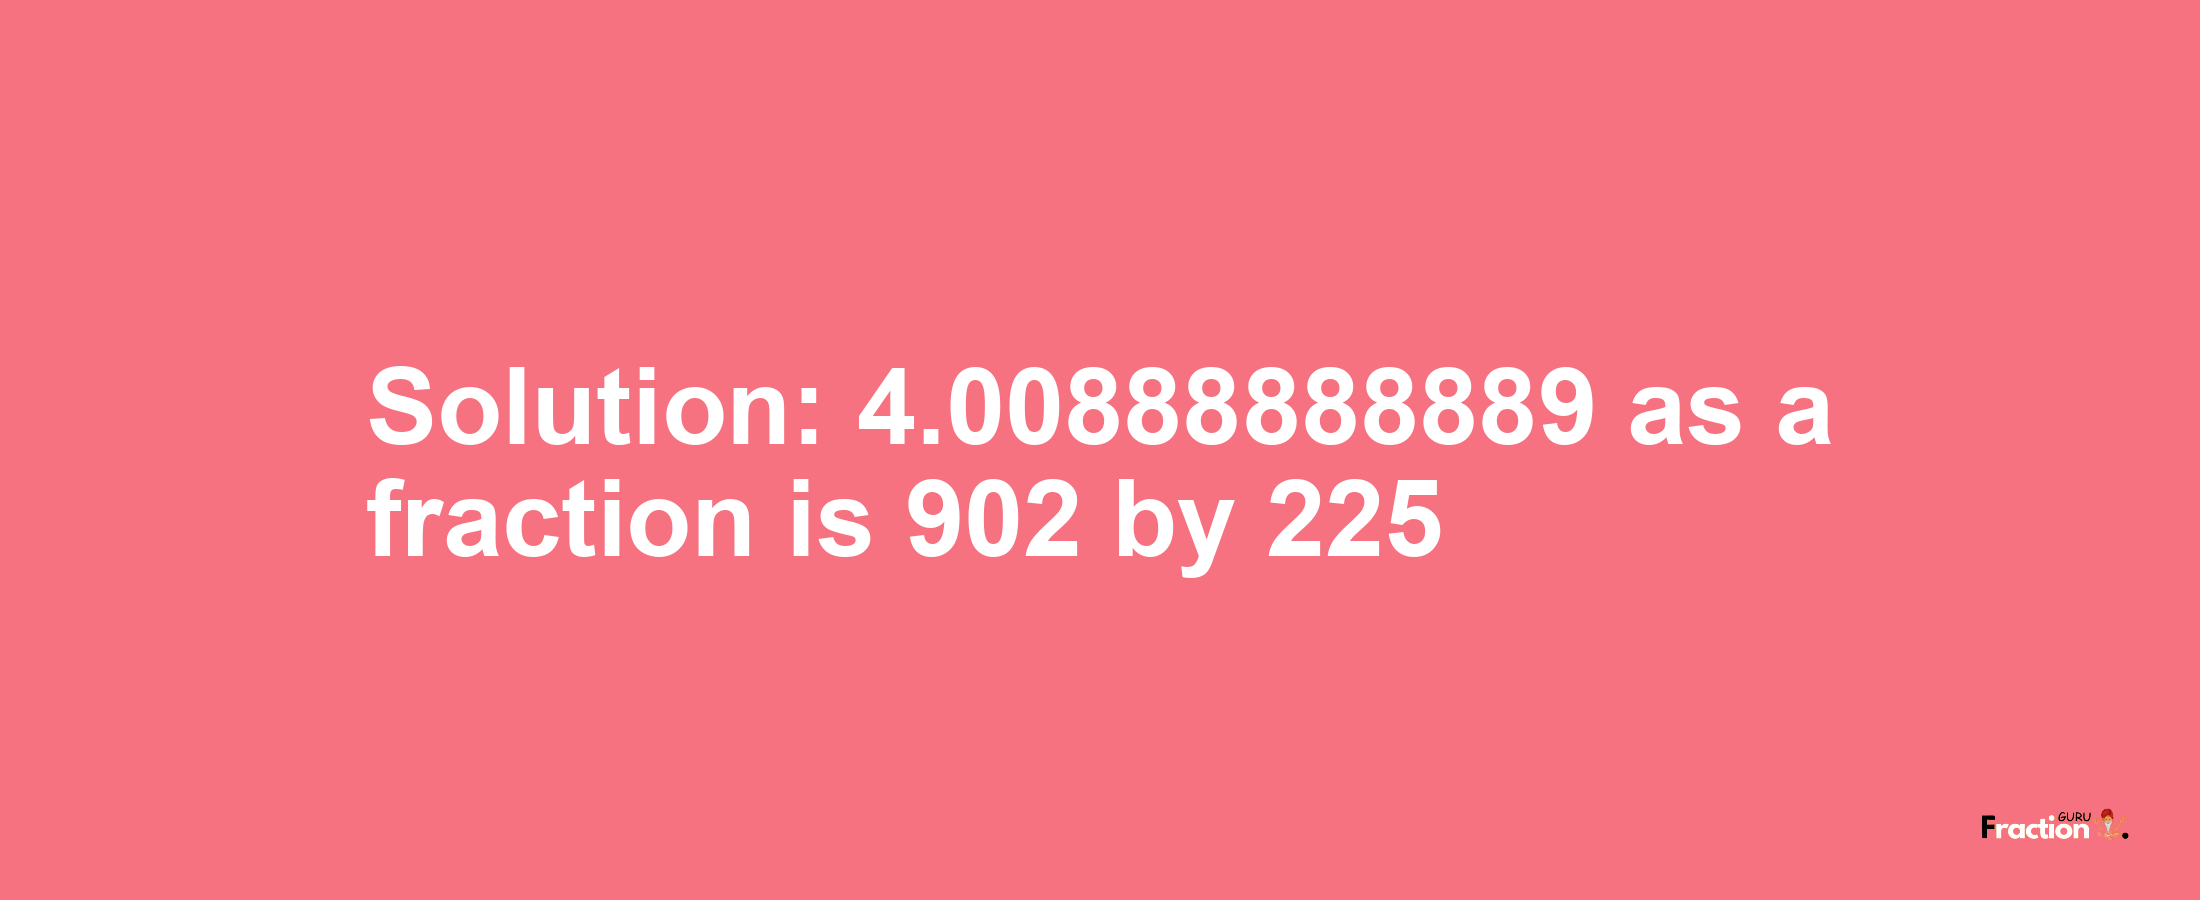 Solution:4.00888888889 as a fraction is 902/225